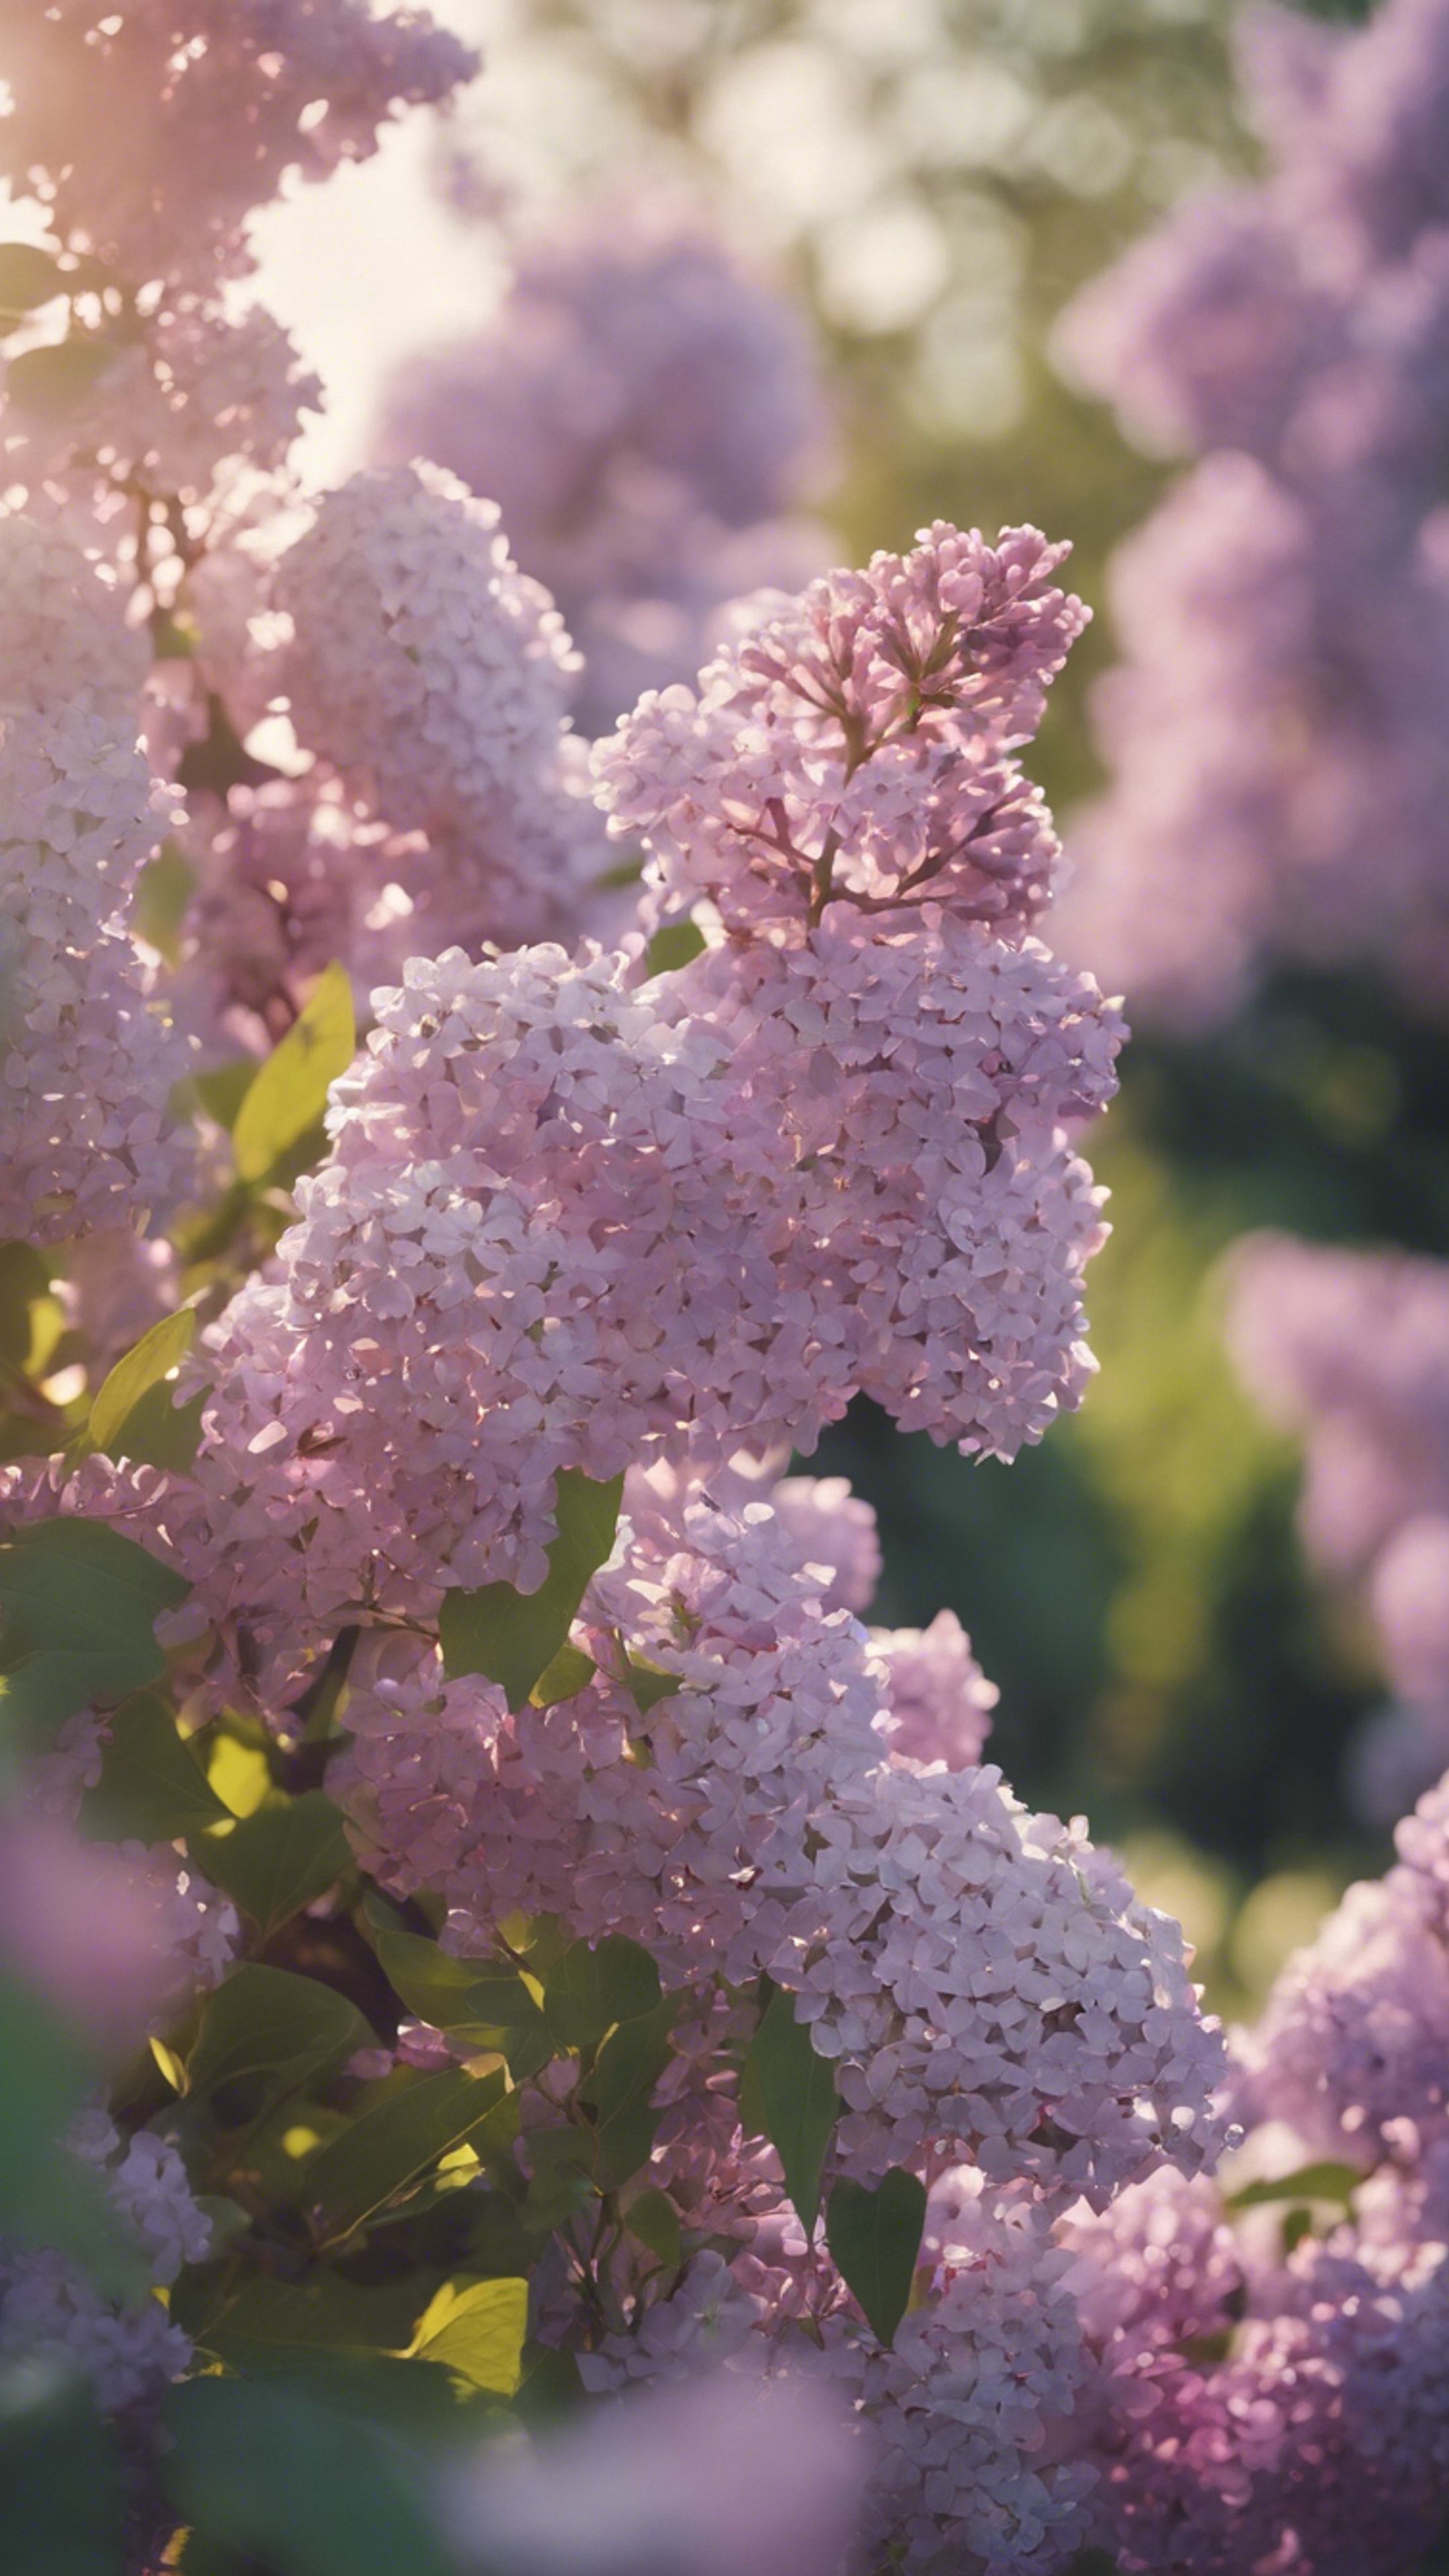 A bountiful garden full of preppy lilac flowers in full bloom under soft sunlight. Ταπετσαρία[535239431e6946dc9128]